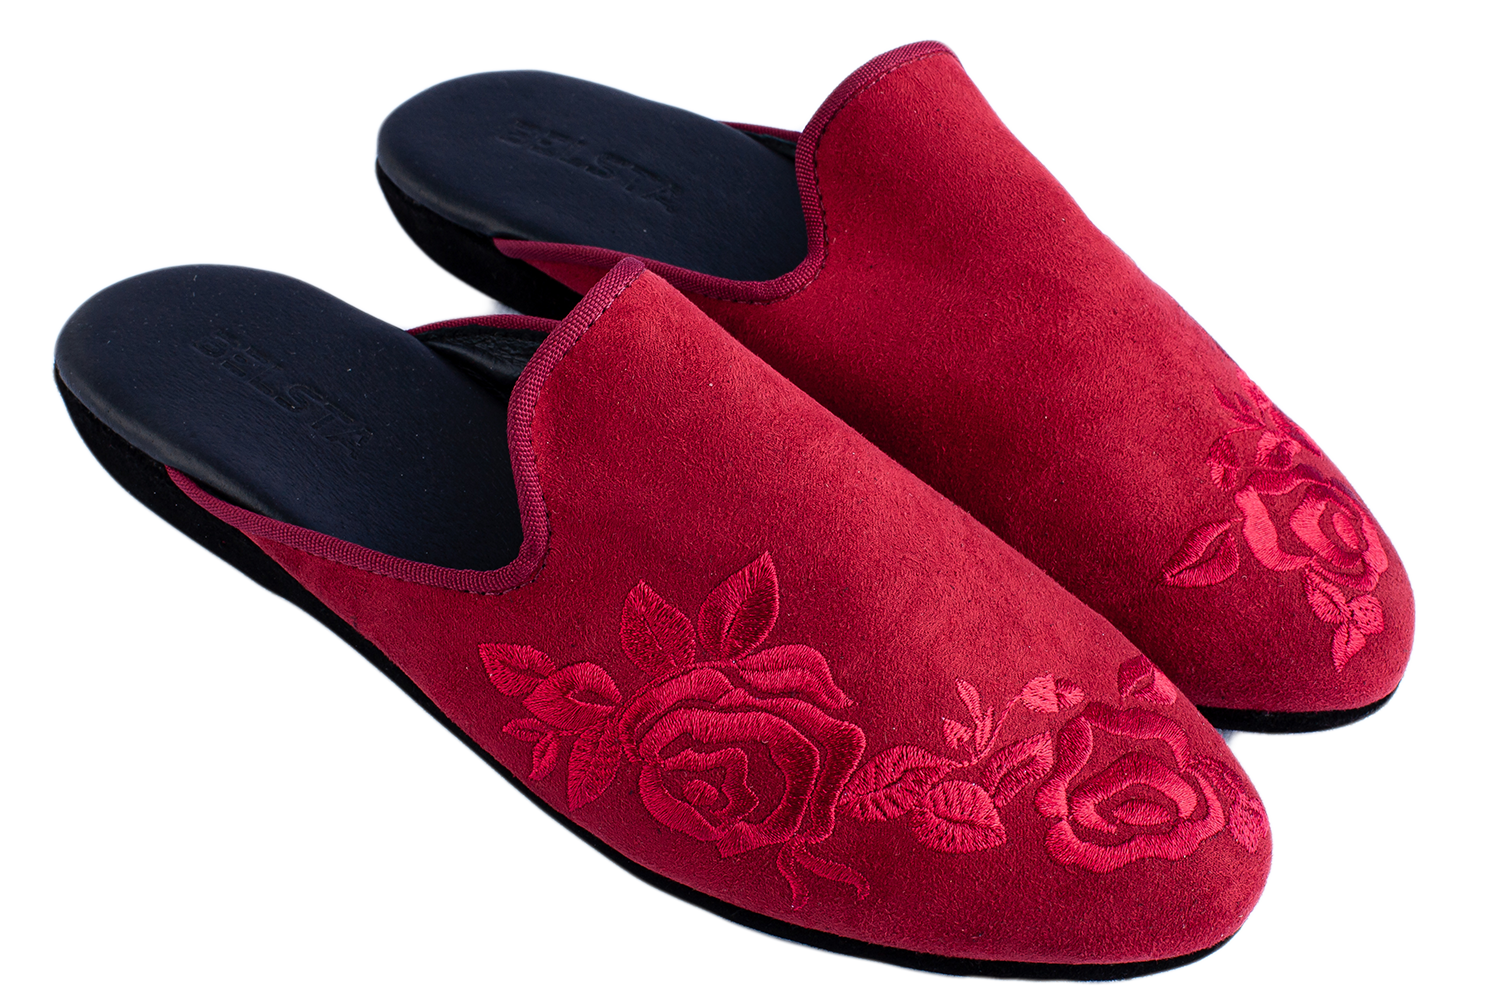 Women's home slippers BELSTA of natural suede - 1